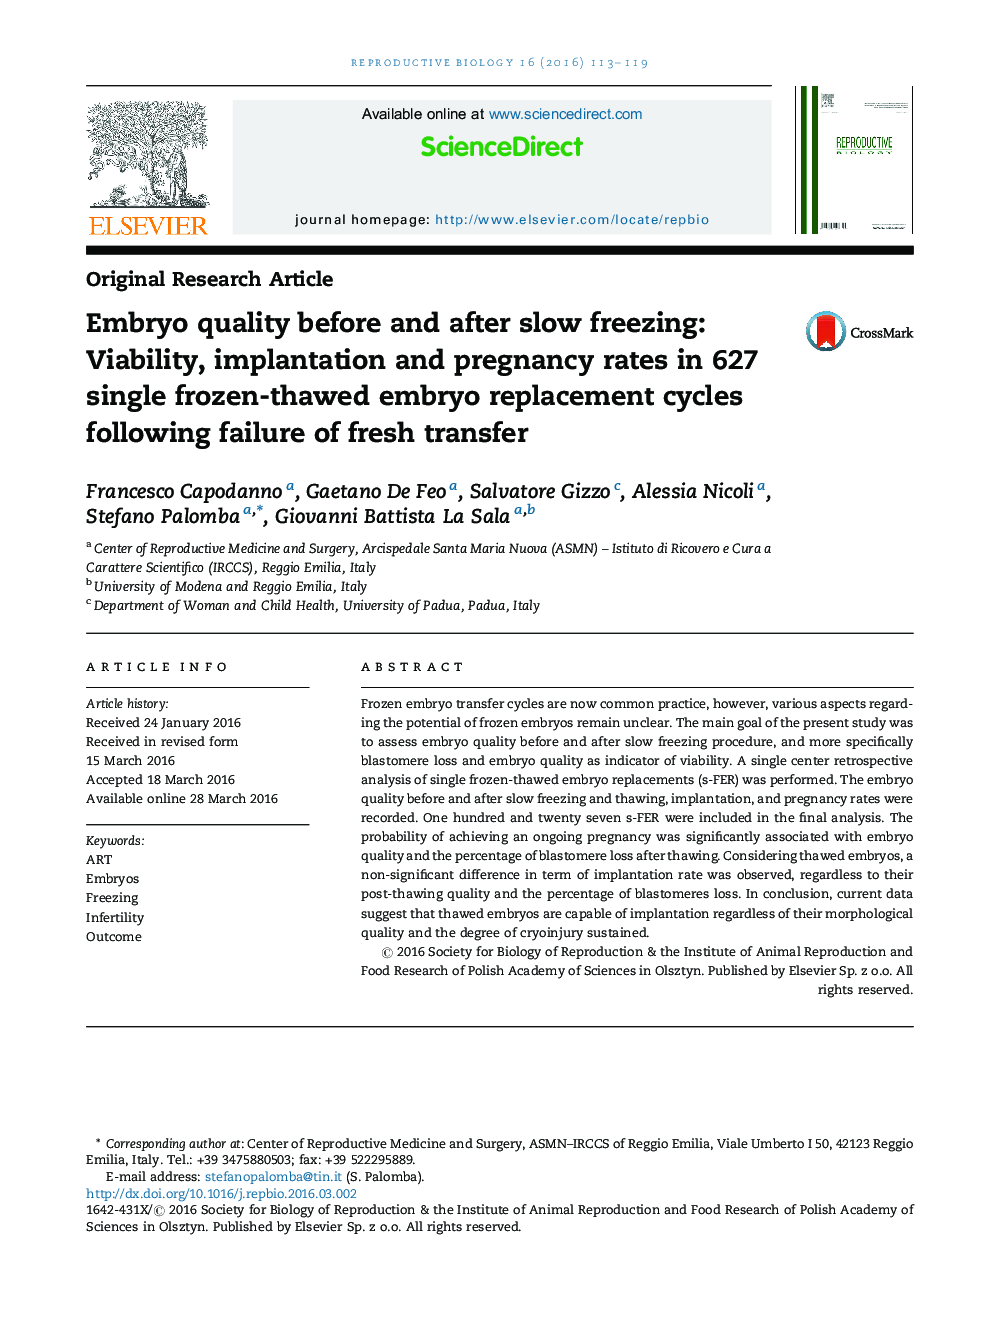 Embryo quality before and after slow freezing: Viability, implantation and pregnancy rates in 627 single frozen-thawed embryo replacement cycles following failure of fresh transfer